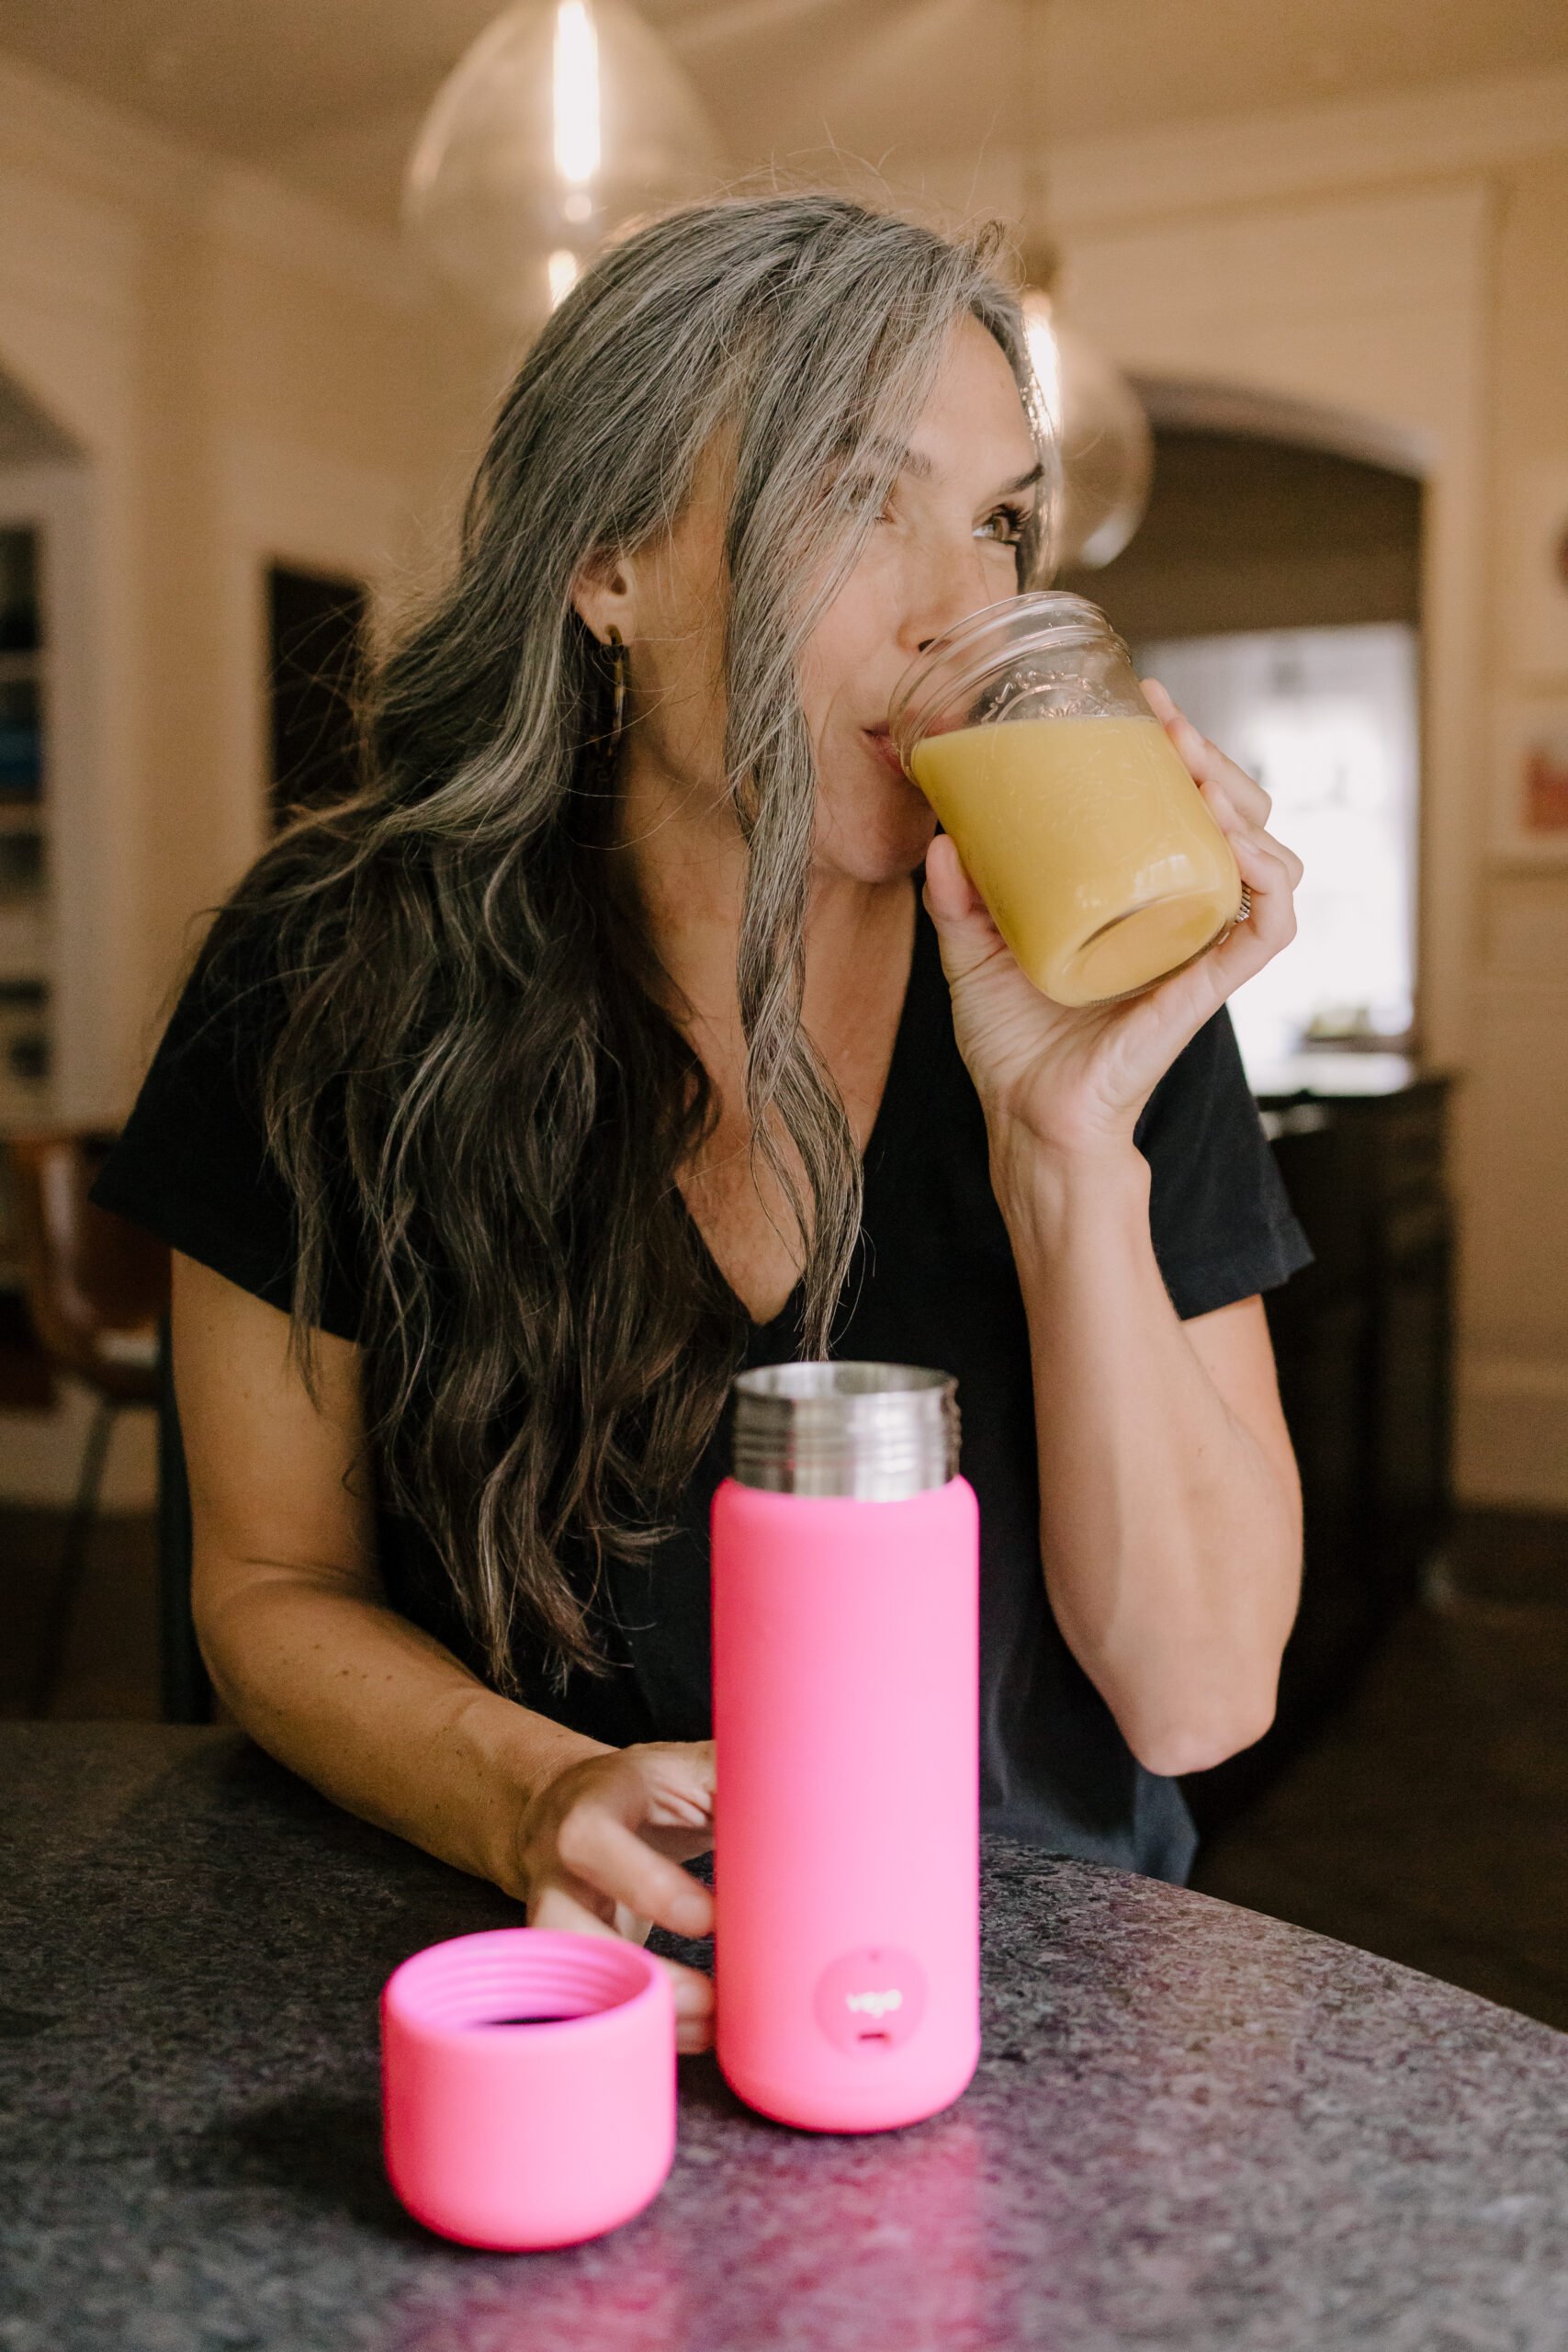 A woman looks off to the side while drinking a blended drink.